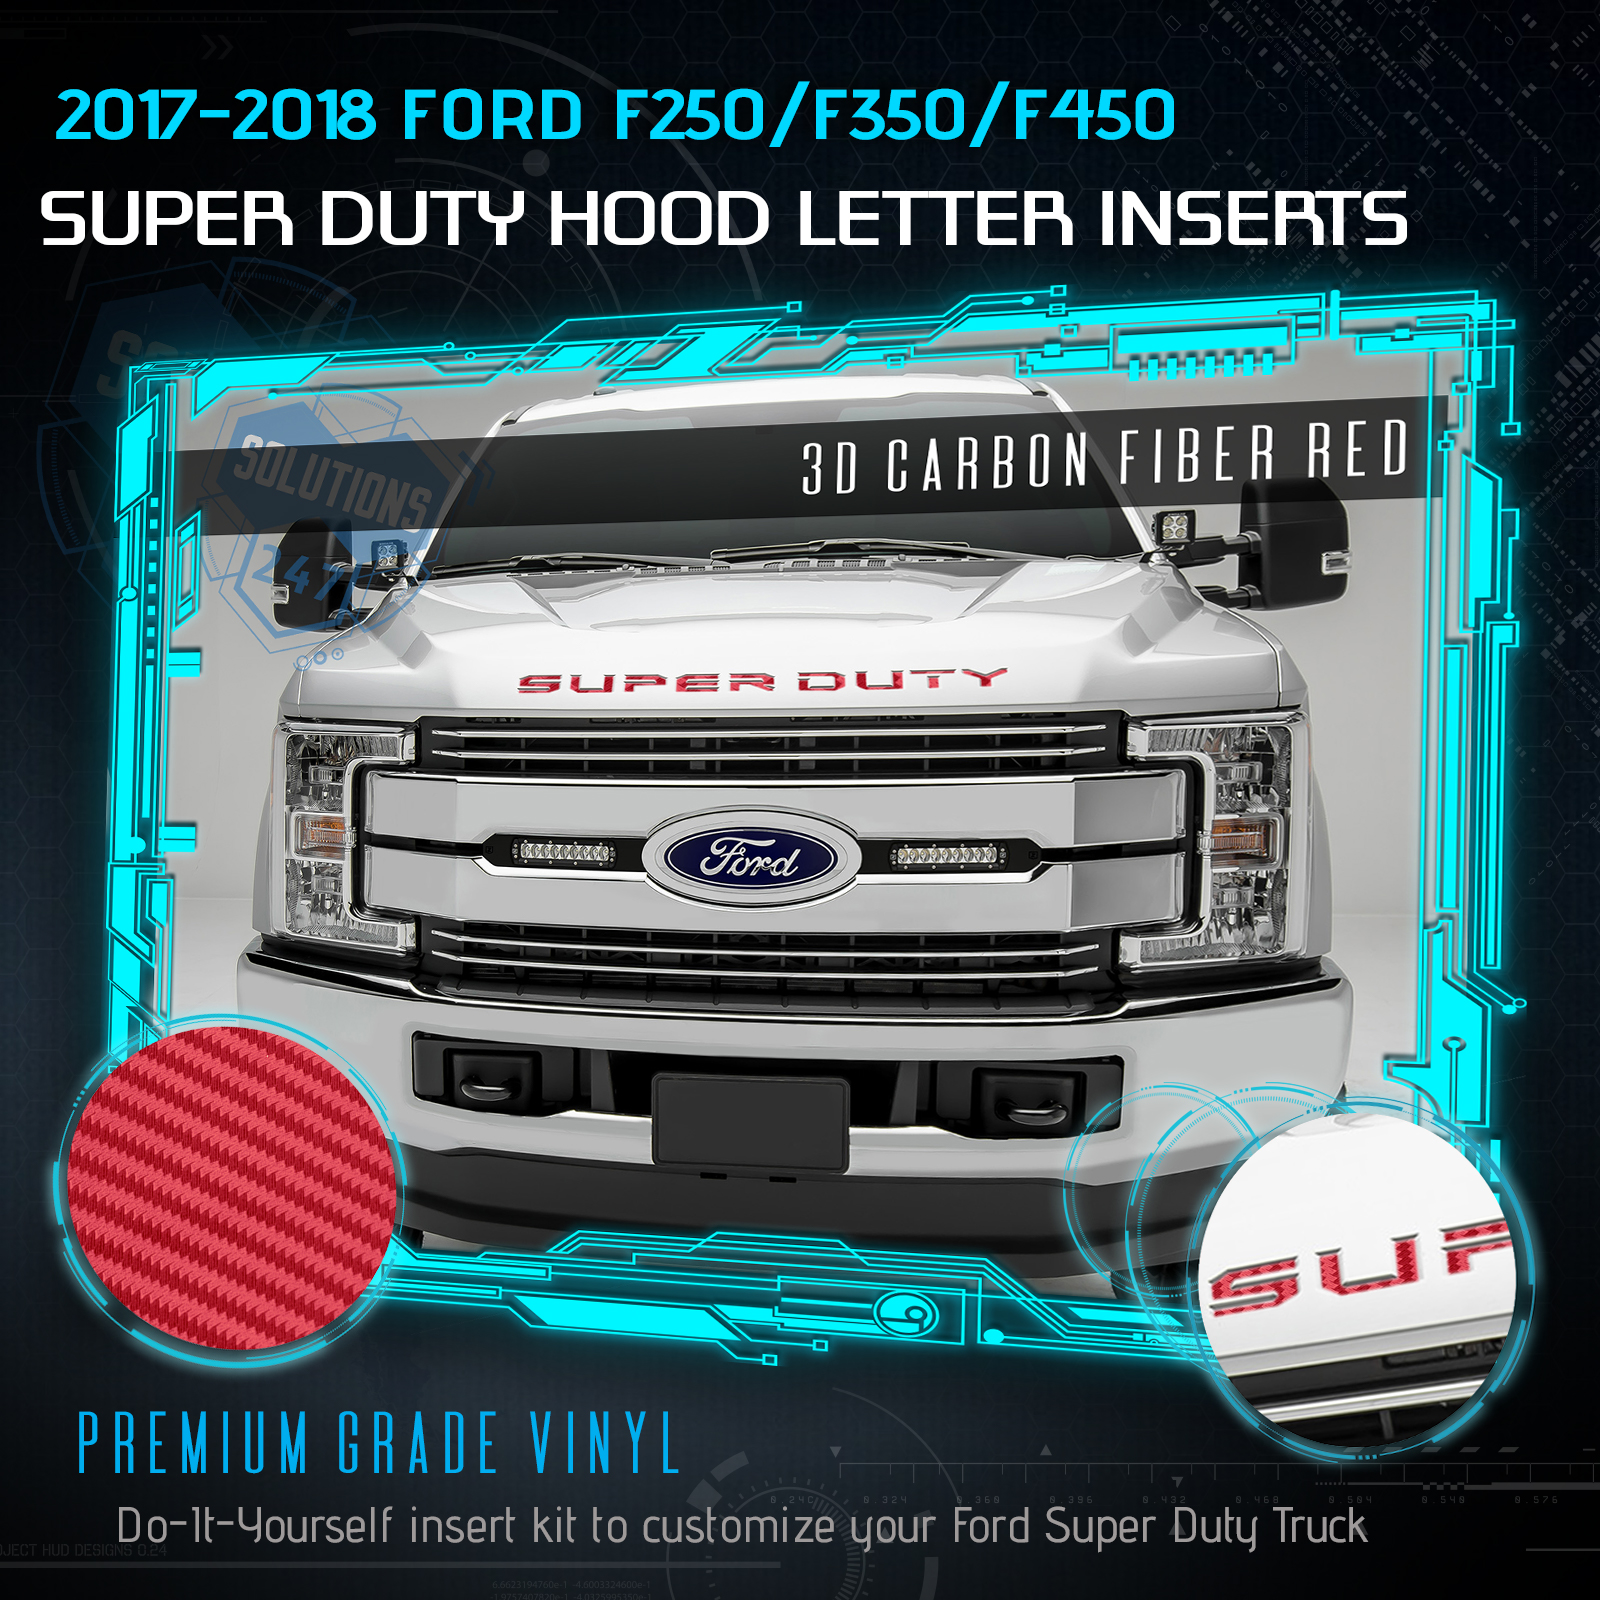 Chrome Front Grill /& Glove Box Adhesive Insert Letters for Ford 2008-2016 F-250 F350 F-450 Super Duty